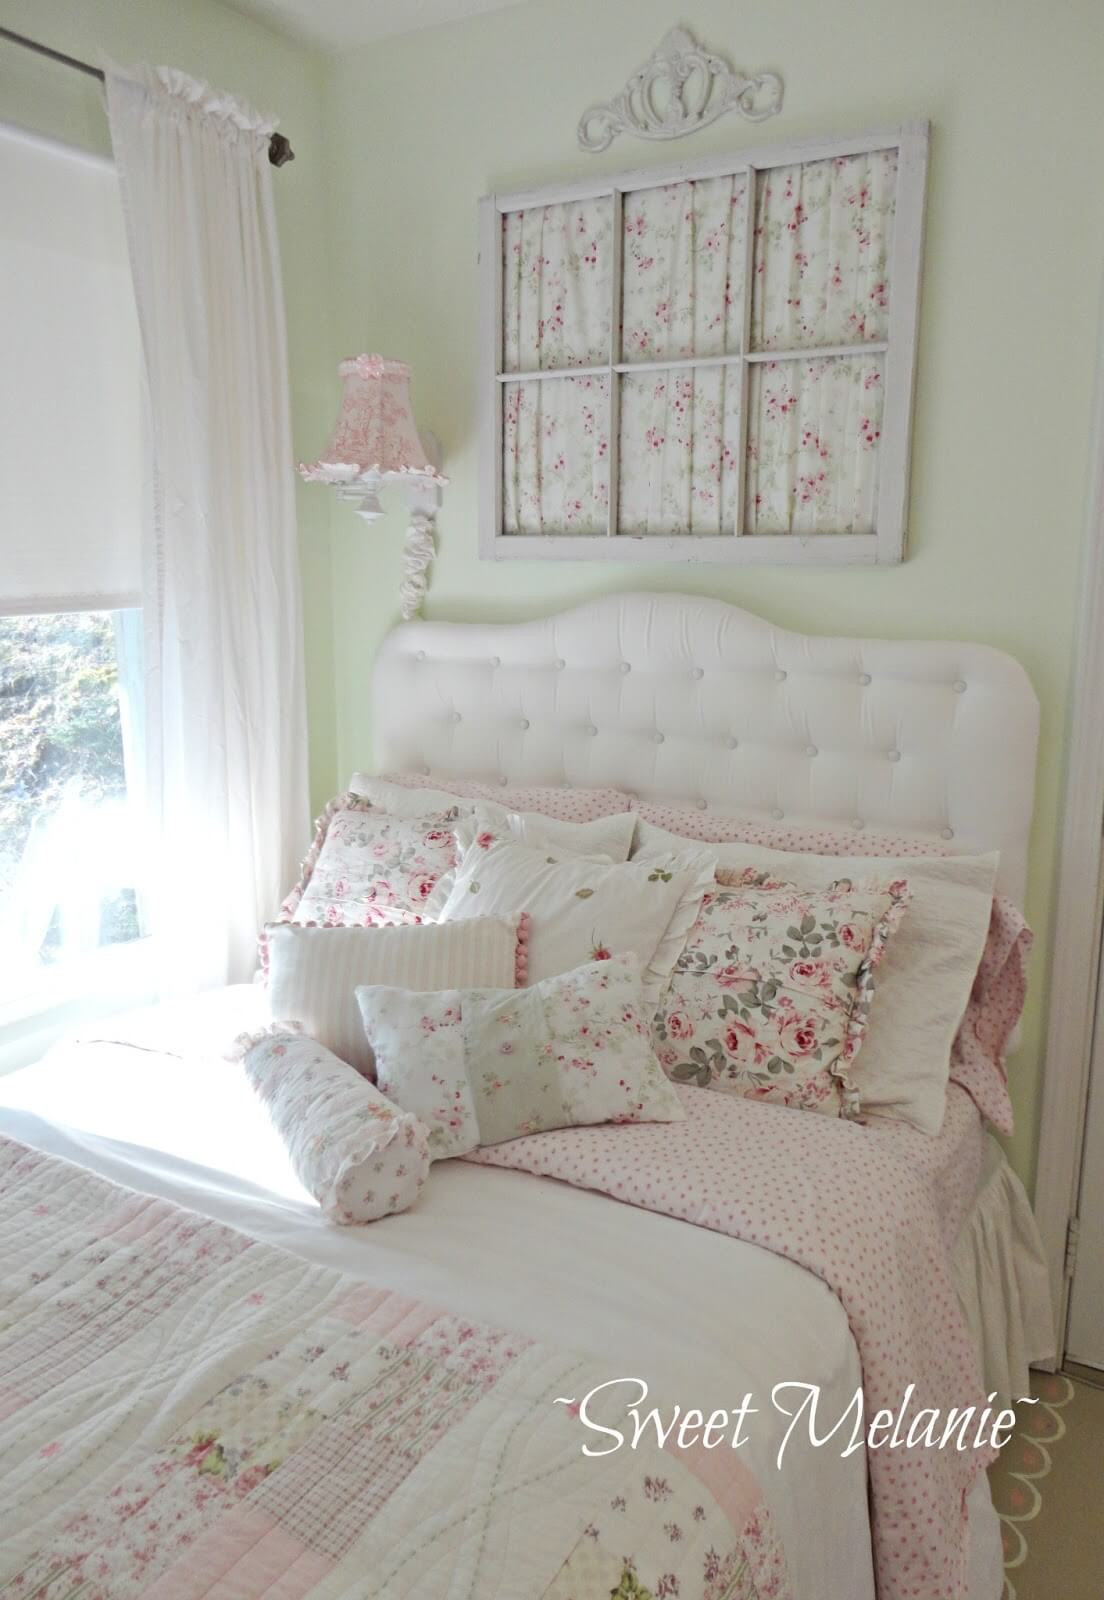 Shabby Chic Bedrooms Images
 35 Best Shabby Chic Bedroom Design and Decor Ideas for 2017